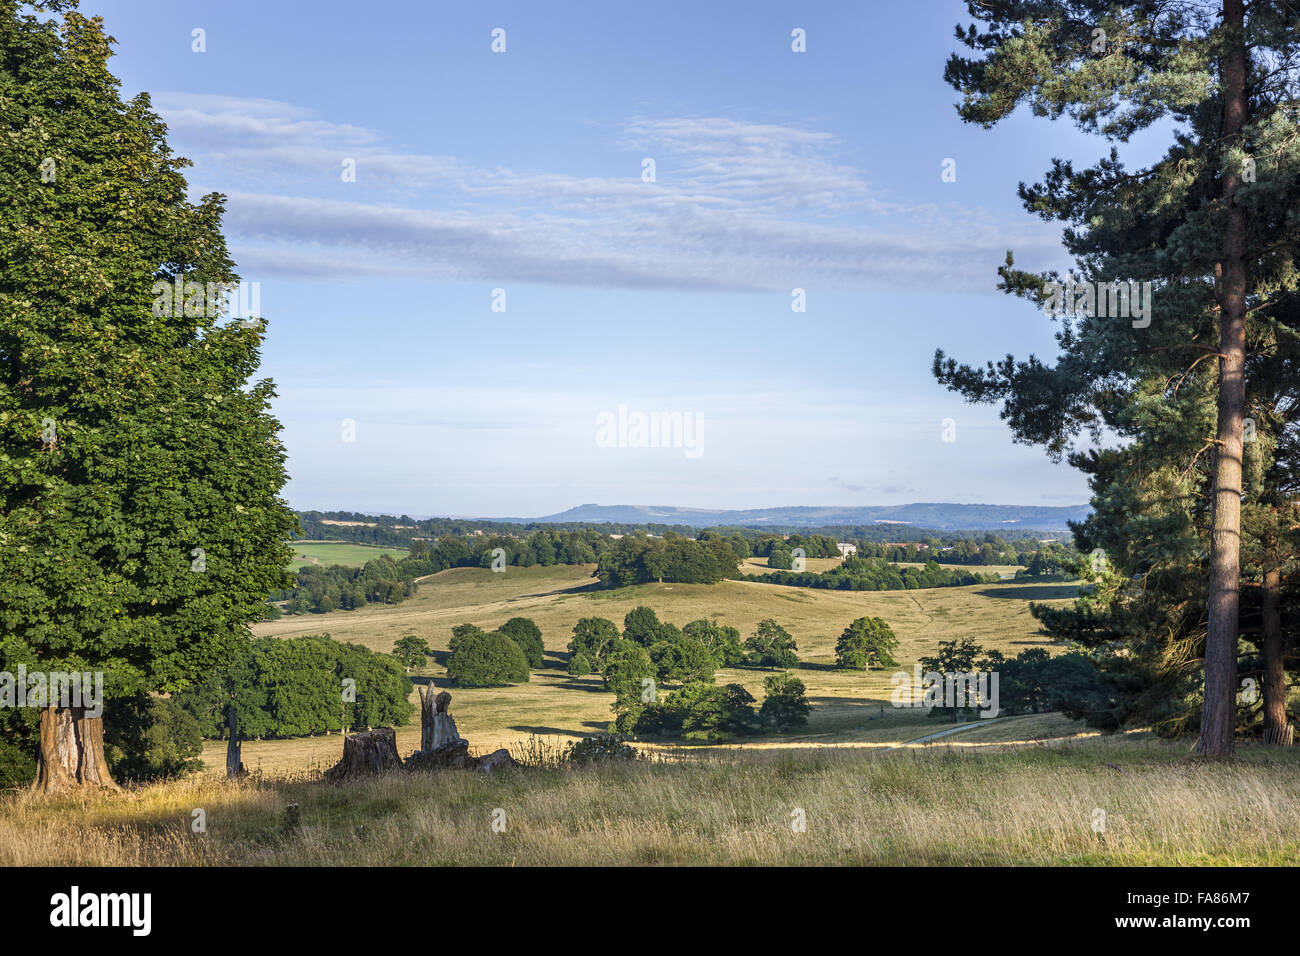 The view from the Concave looking south east, towards the house, at Petworth House and Park, West Sussex. The deer park at Petworth was landscaped by 'Capability' Brown. Stock Photo